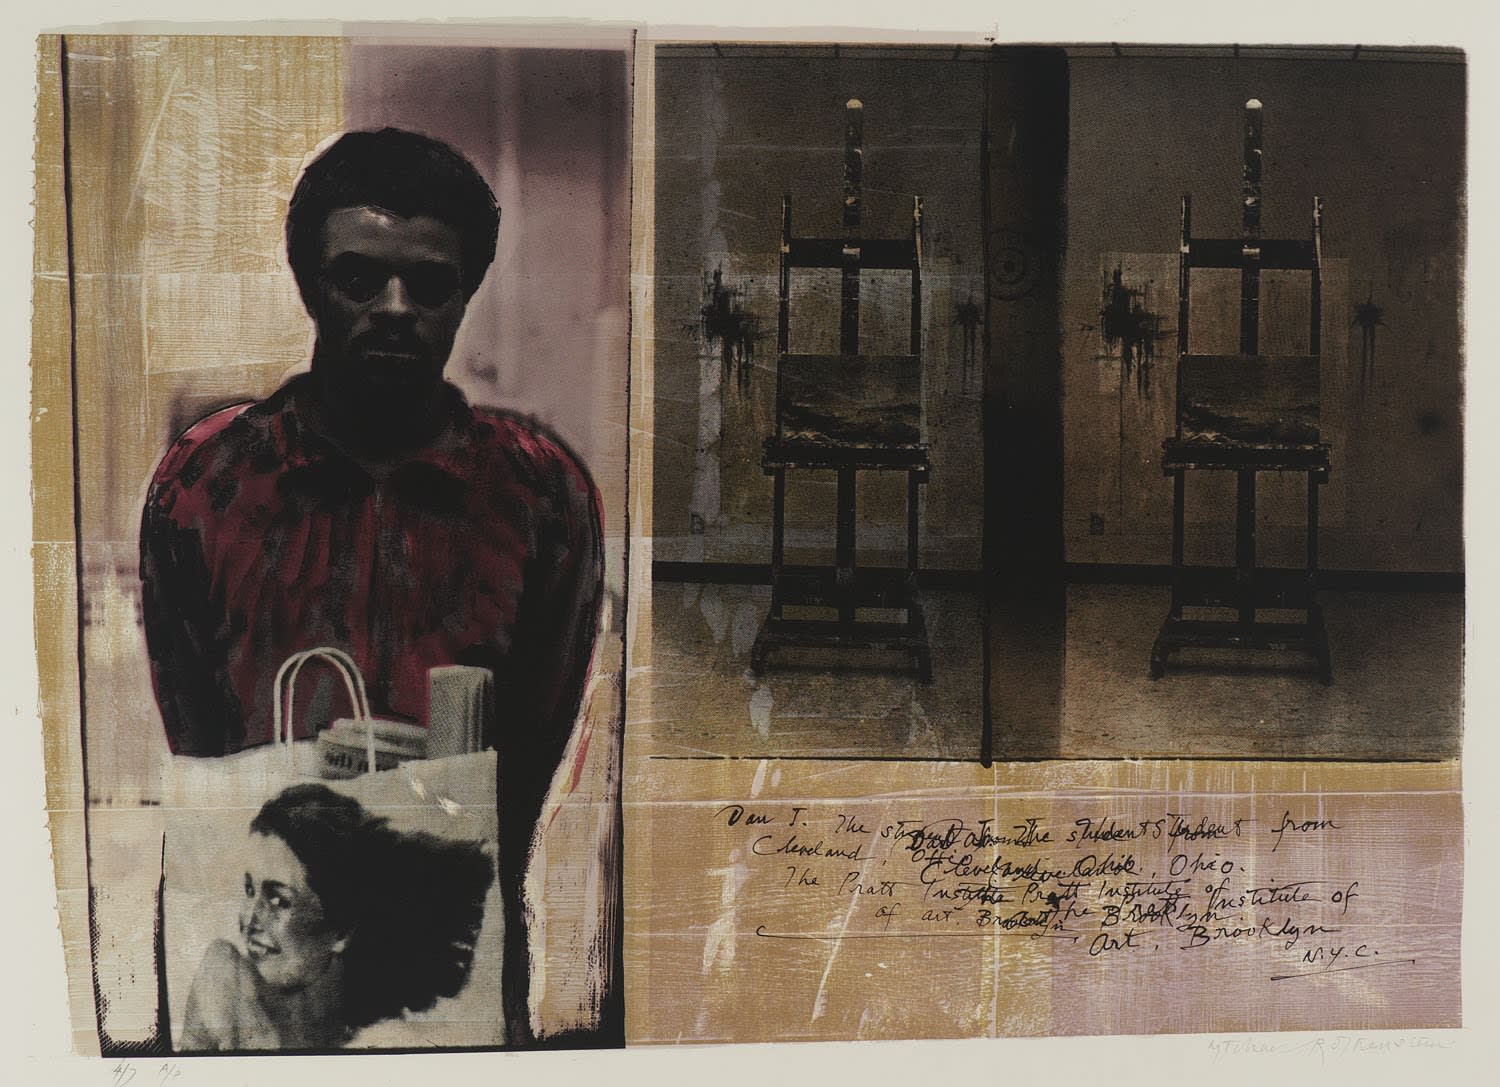 Michael Rothenstein (1908-1993) The Shooting of George Wallace 1973 Photographic silkscreen on paper 55.7 x 76.2 cm Ben Uri Collection © Michael Rothenstein estate To see and discover more about this artist click here